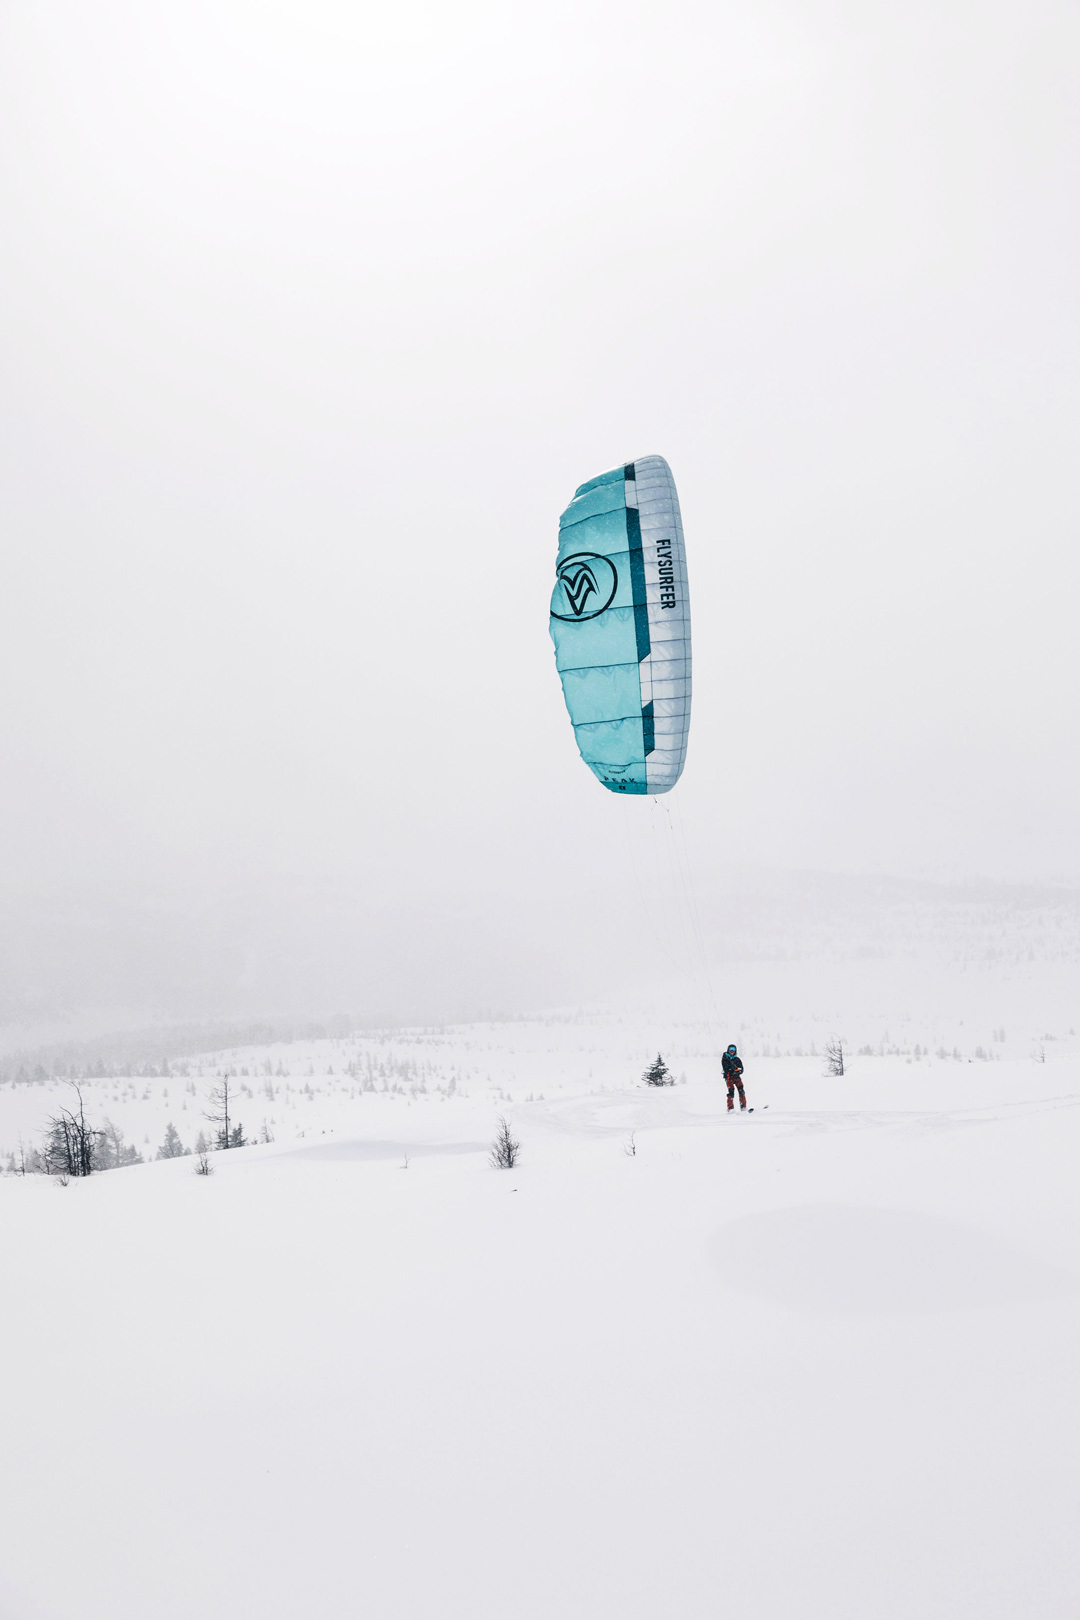 Get to Know Flysurfer's New - Out Now - Kiteboarding & Kitesurfing